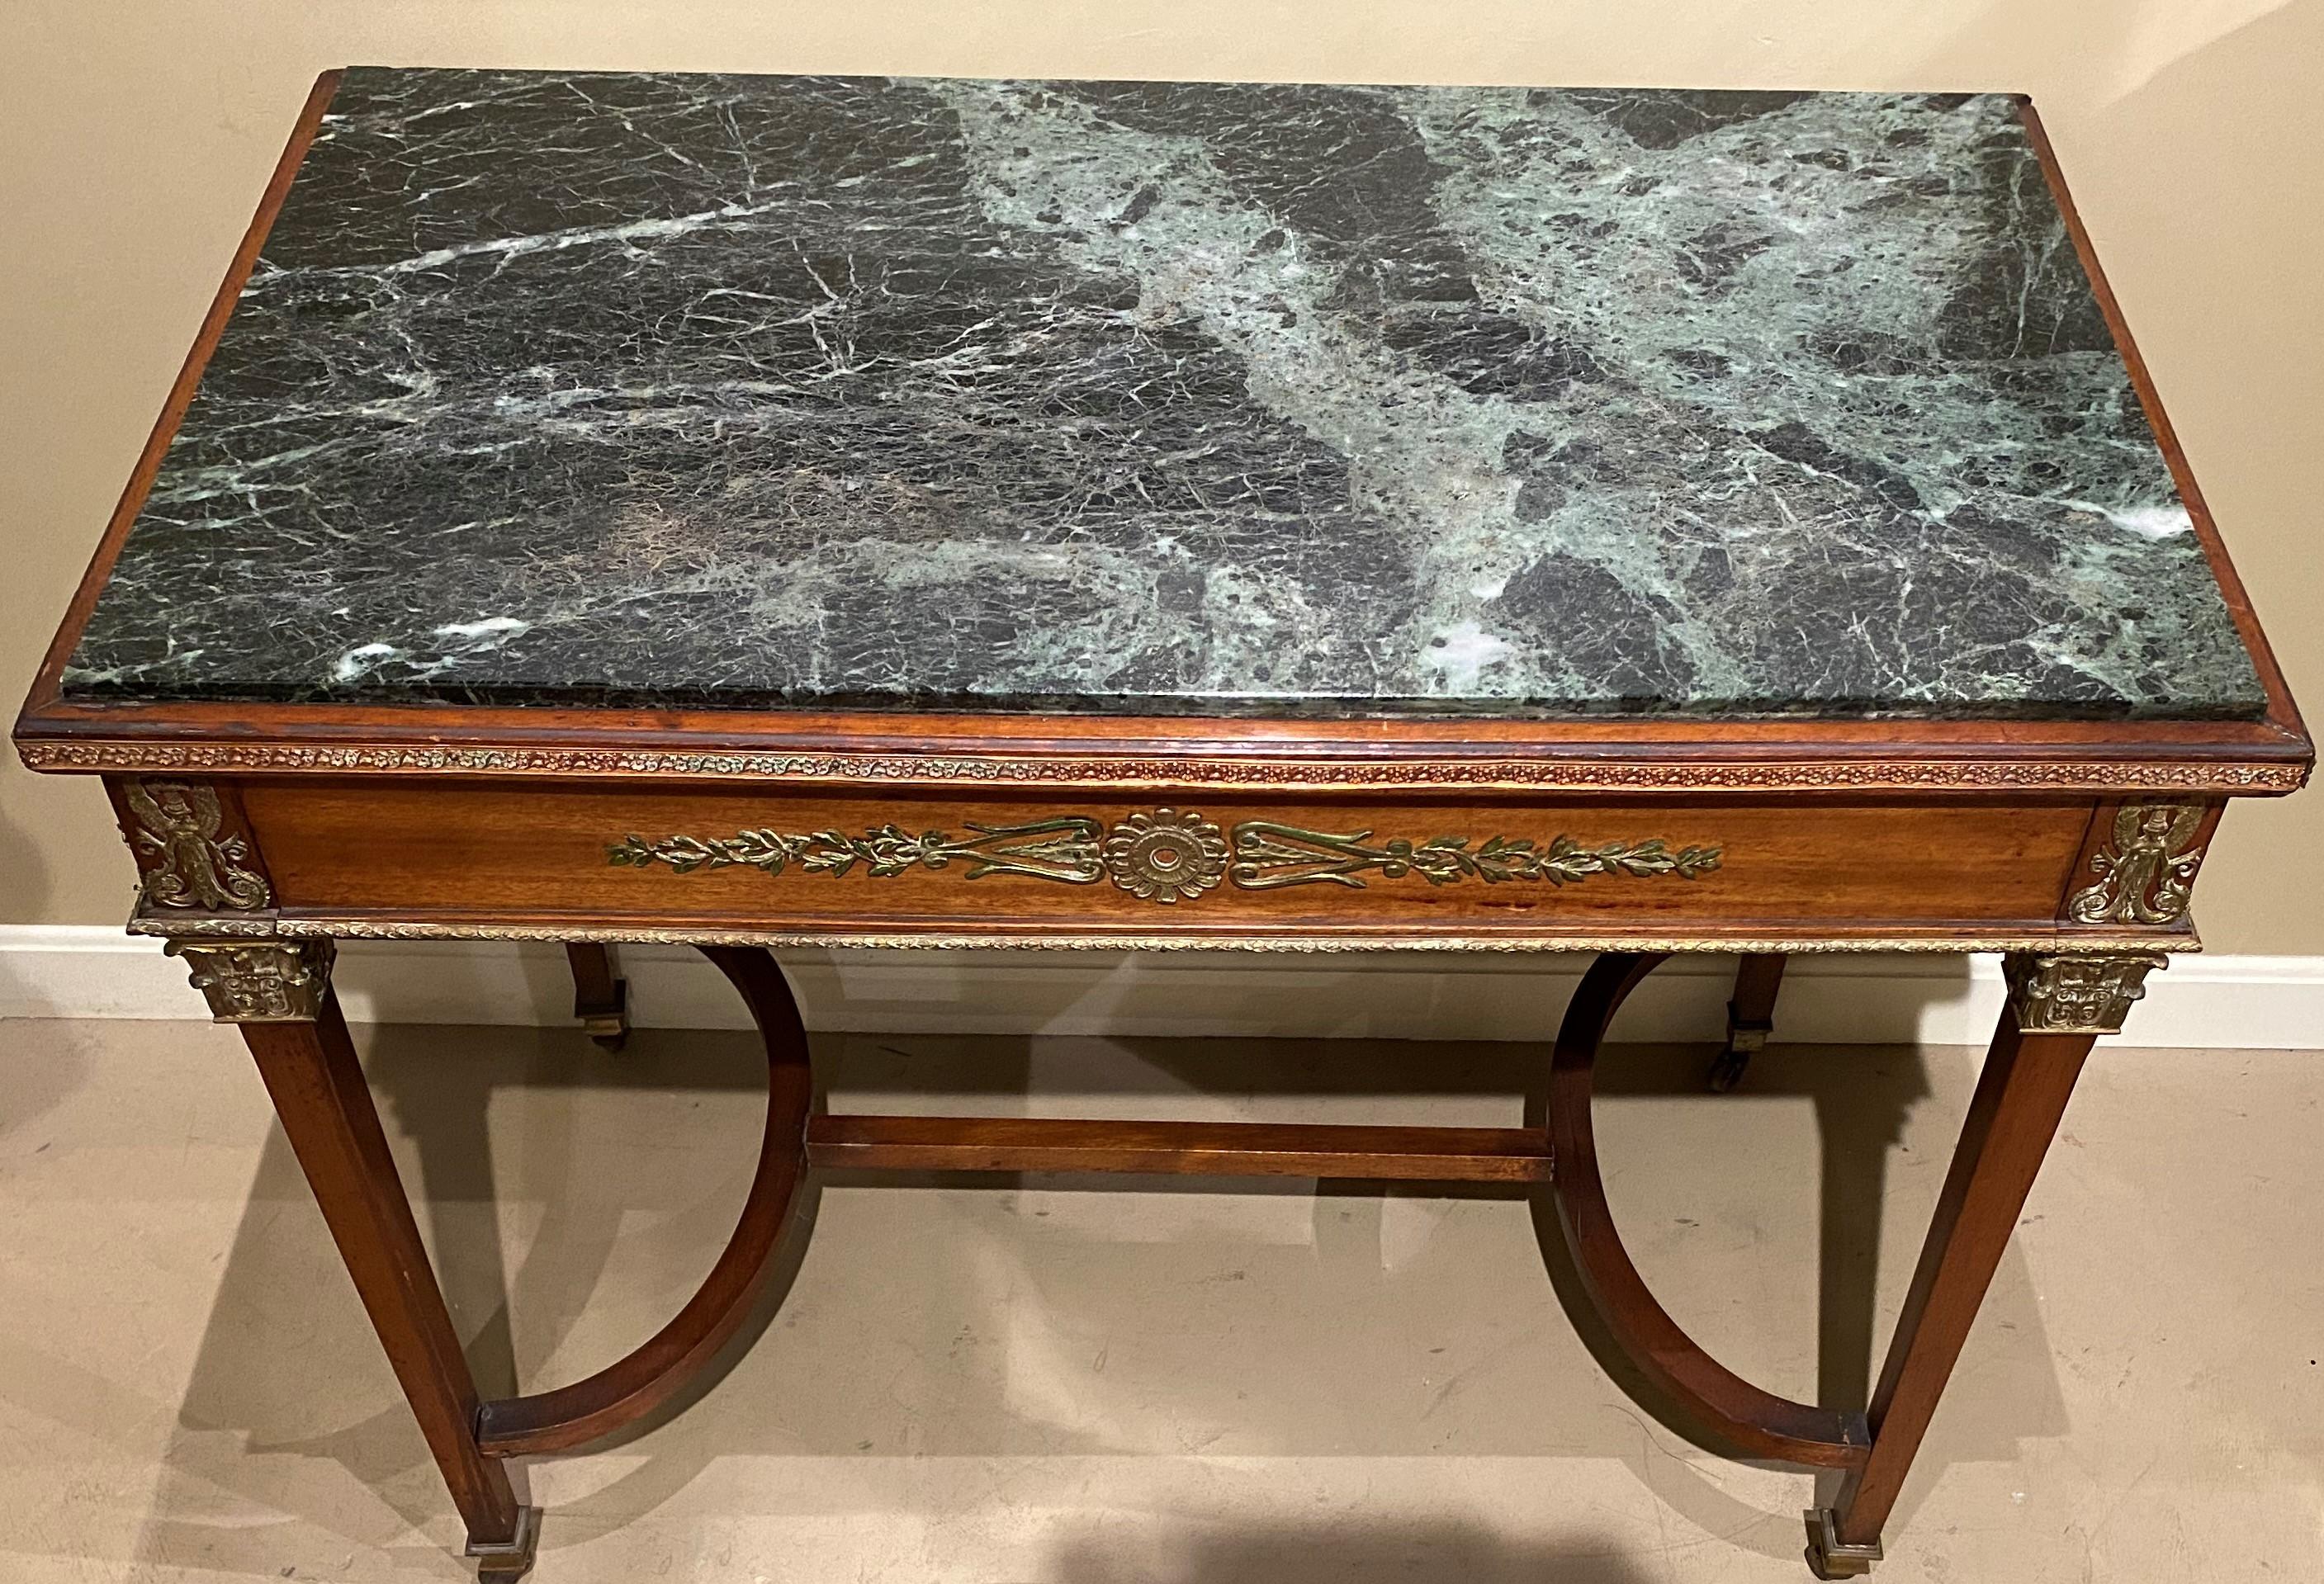 A beautiful French mahogany one-drawer rectangular writing table with green variegated marble top, with well articulated cast doré foliate ormolu and edge banding on the frieze on all four sides, as well as figural ormolu on each corner, supported